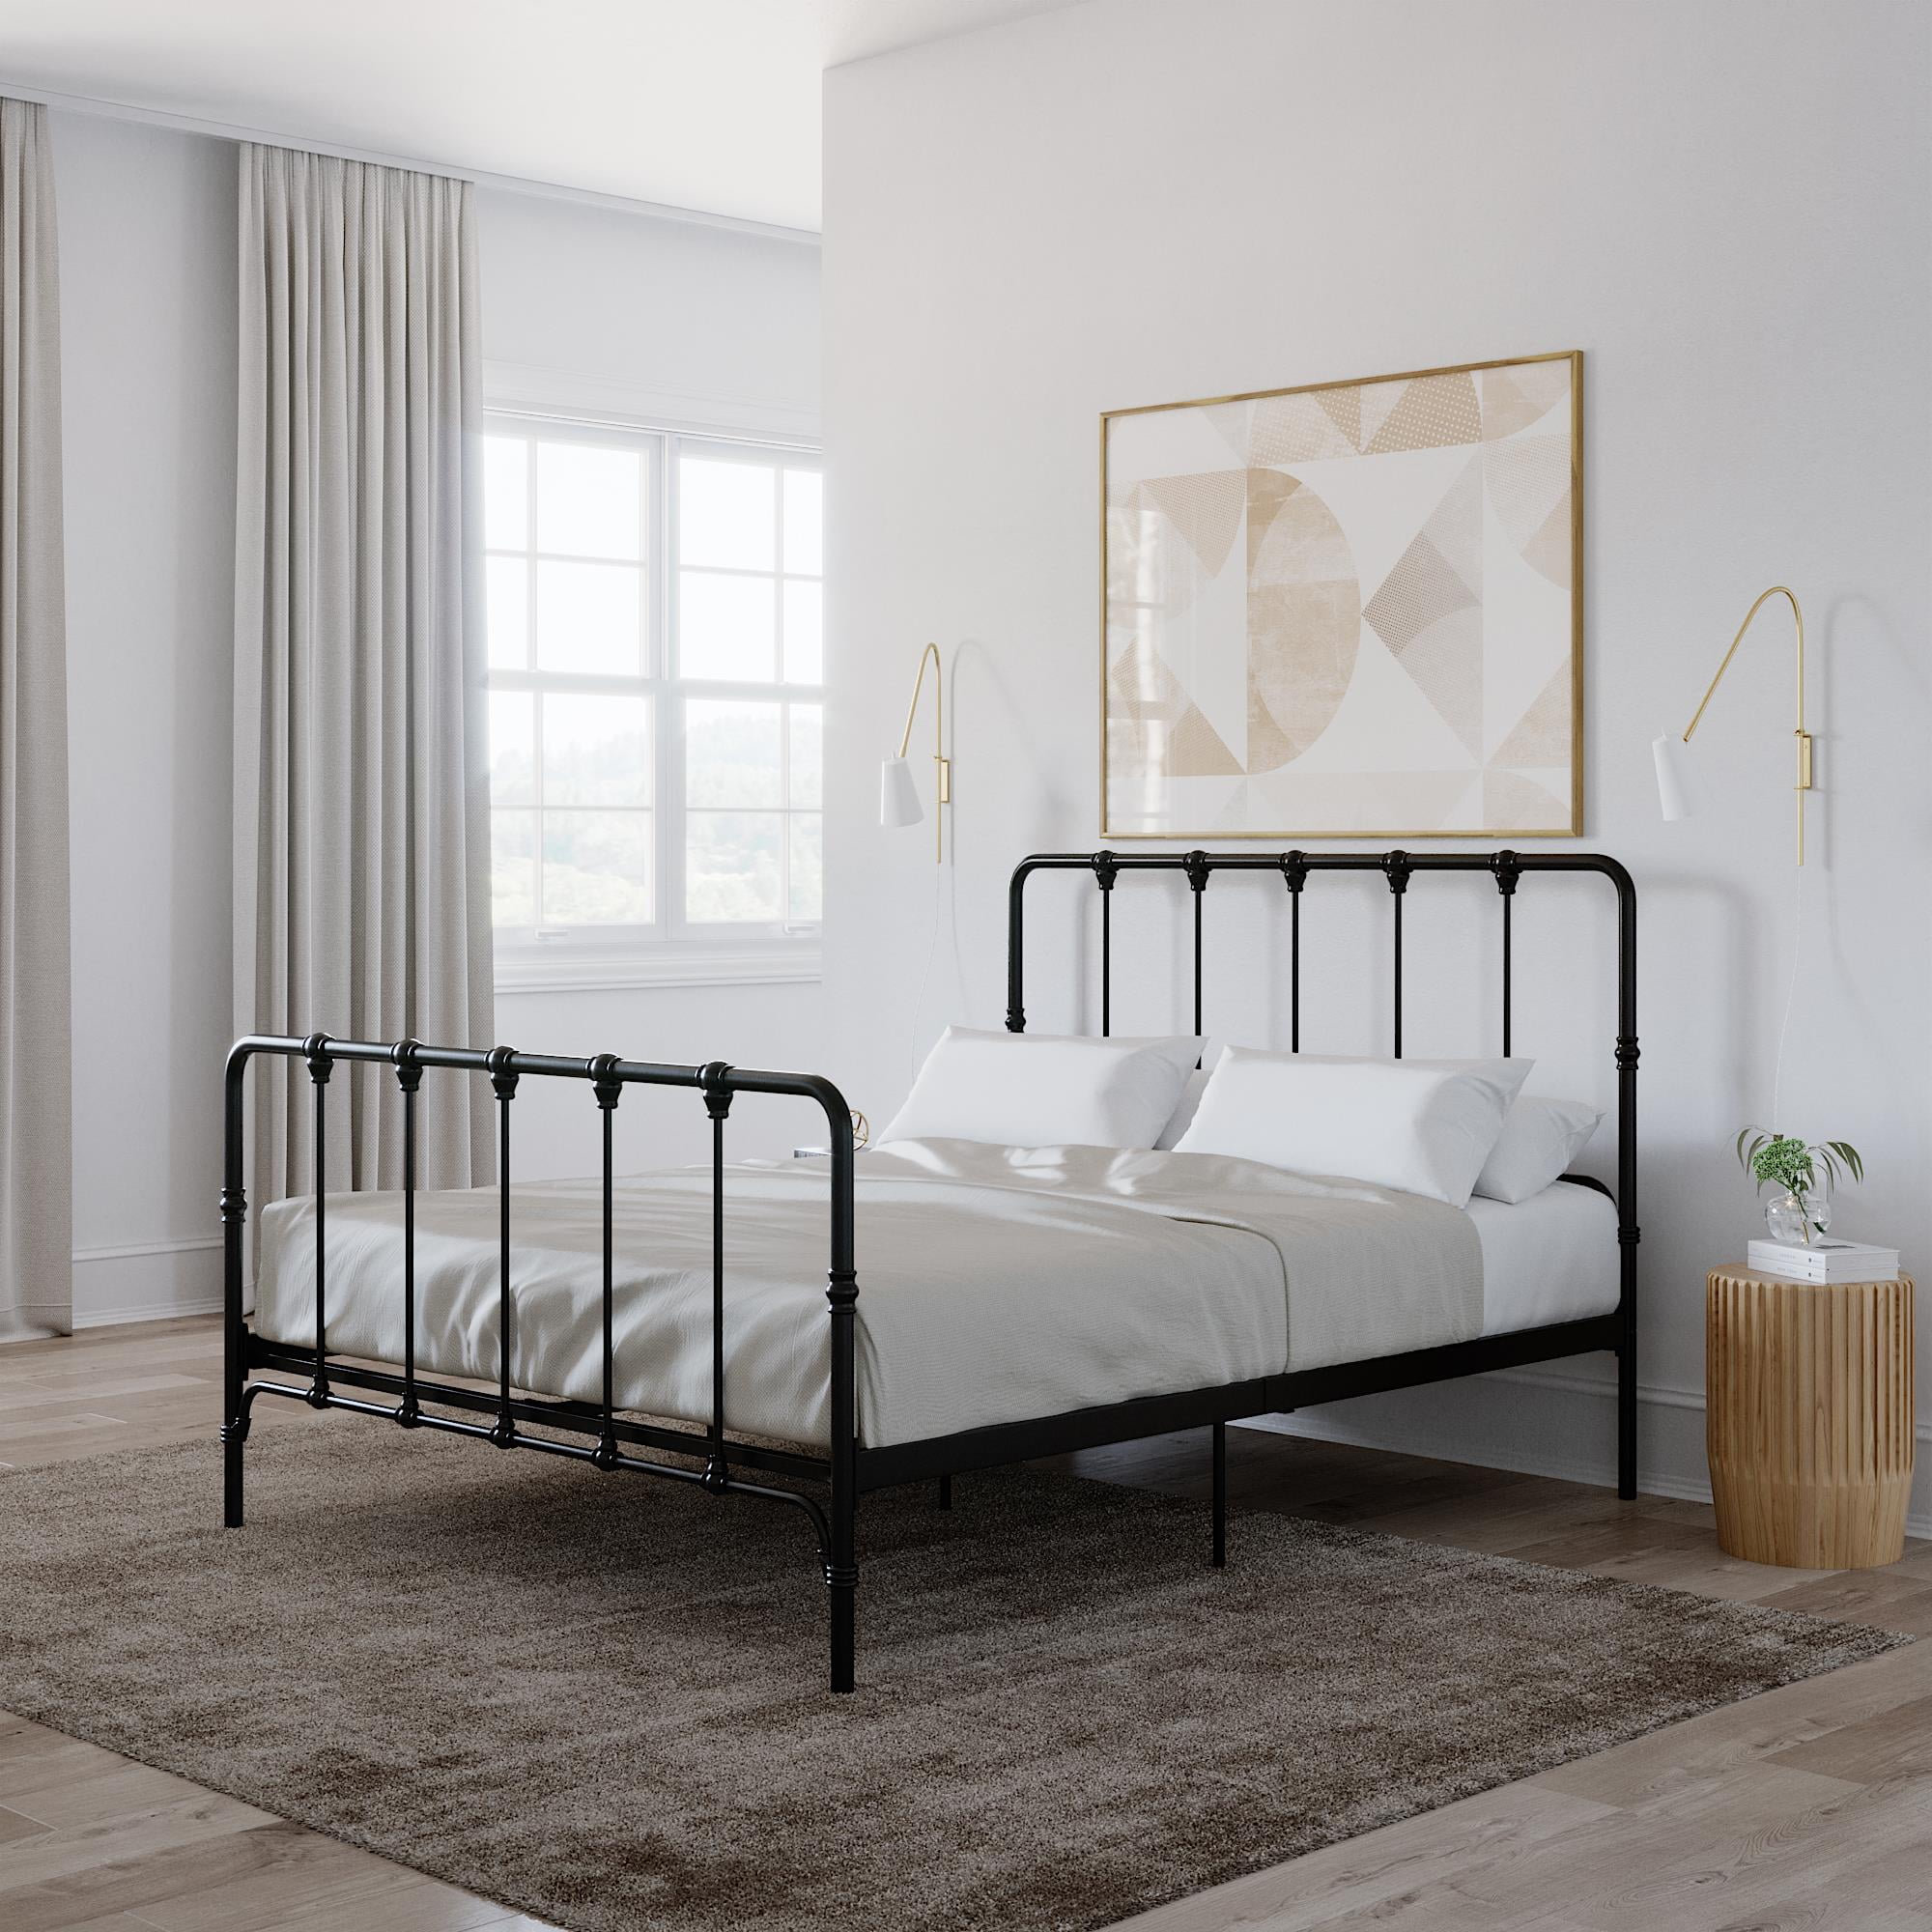 Mainstays Farmhouse Metal Bed Full, Are Metal Bed Frames Bad For You